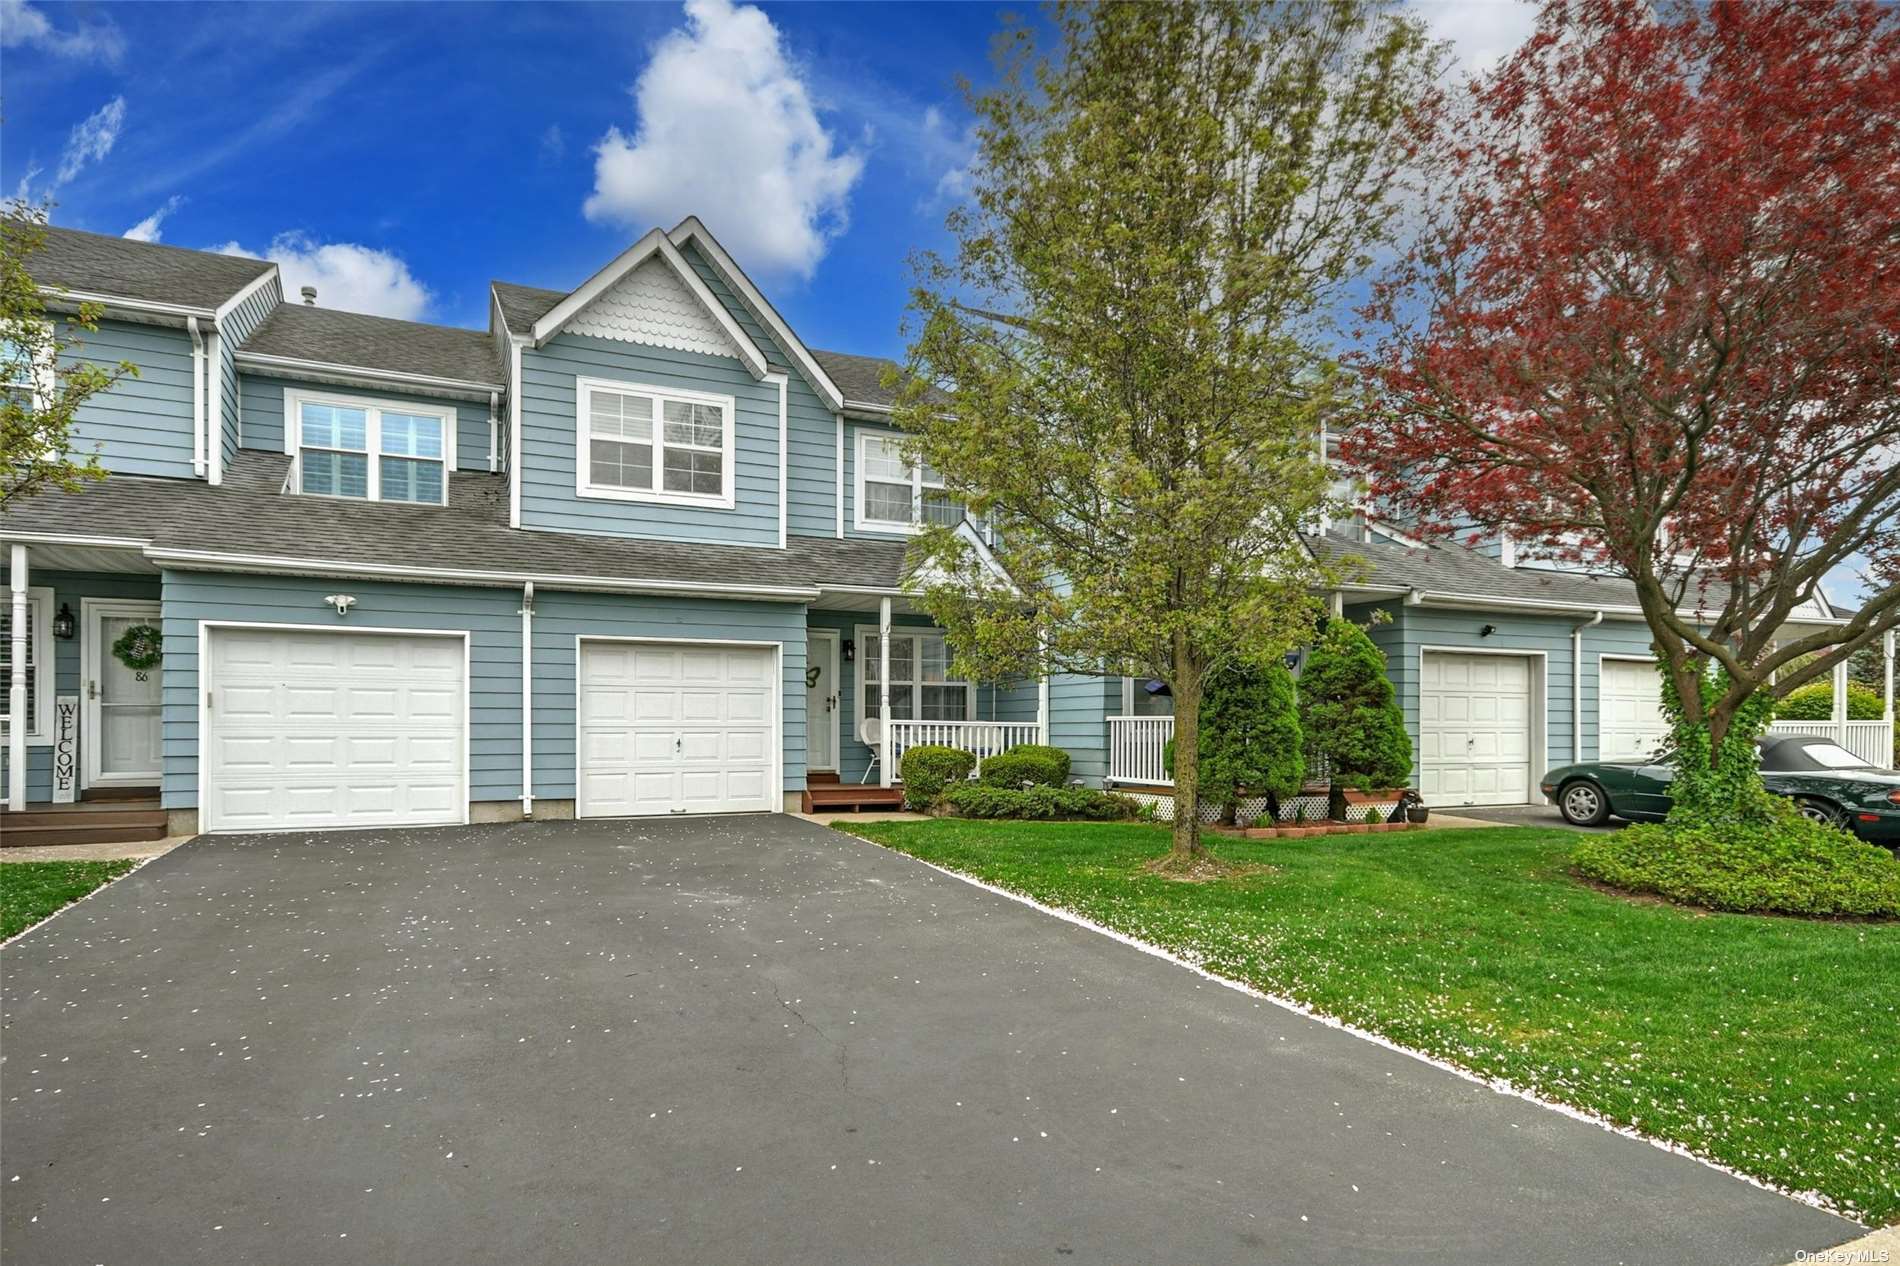 View Central Islip, NY 11722 townhome